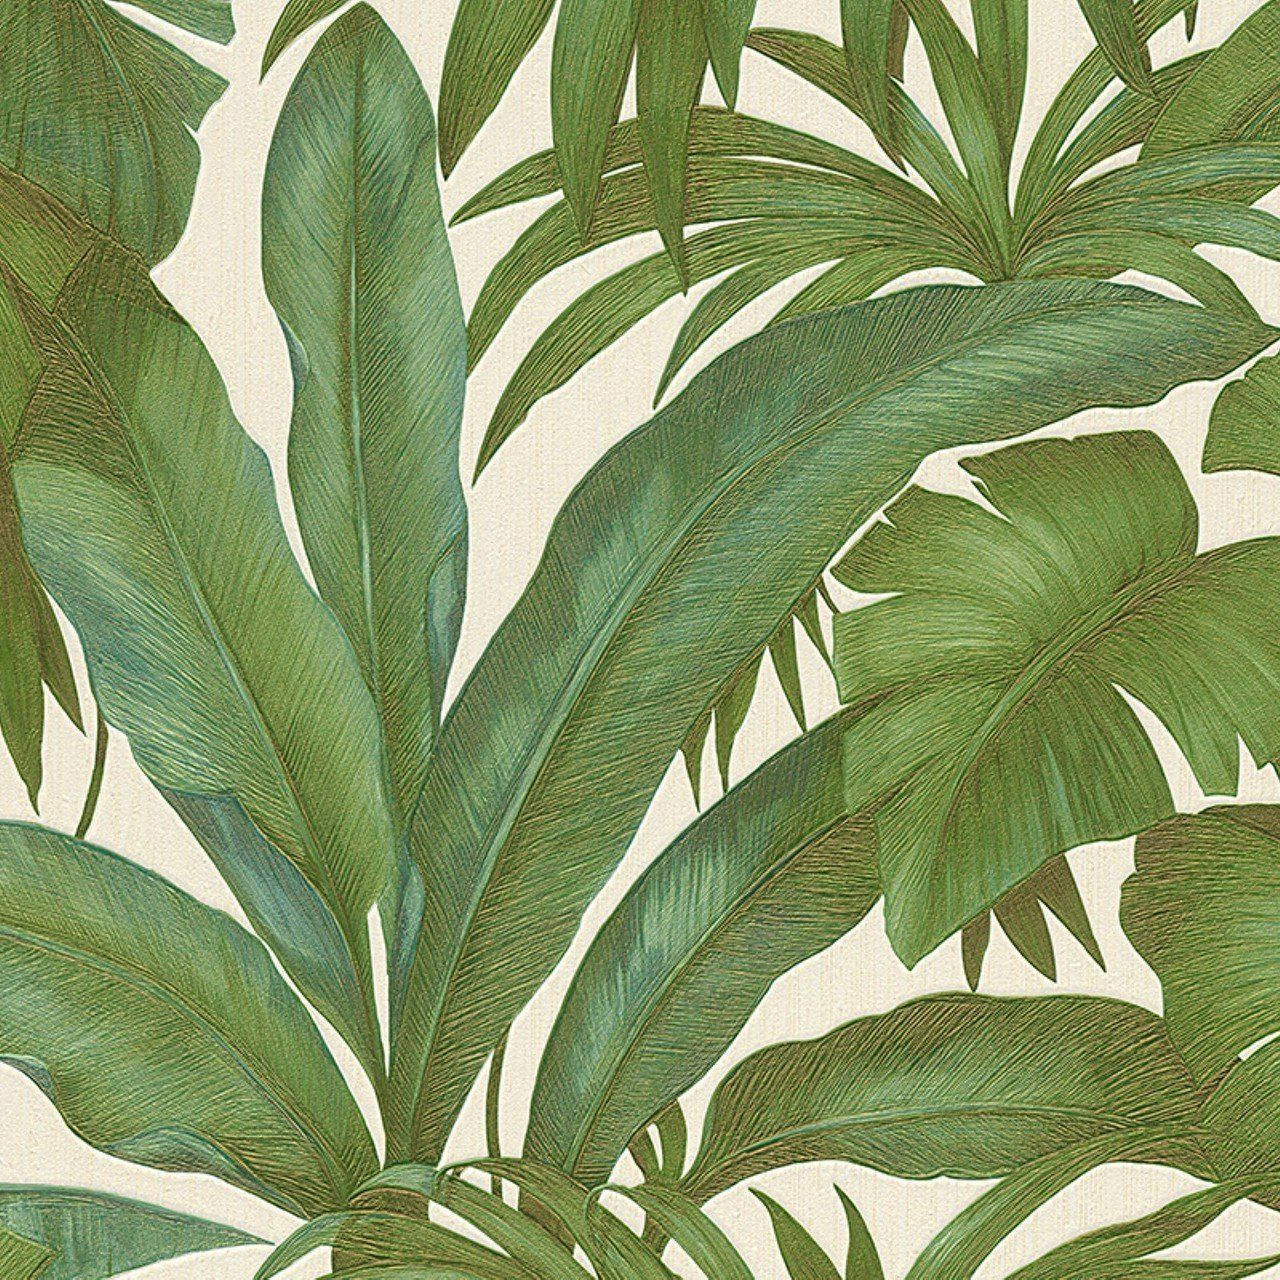 Live a Life of Luxury with Versace Green Leaf Wallpaper